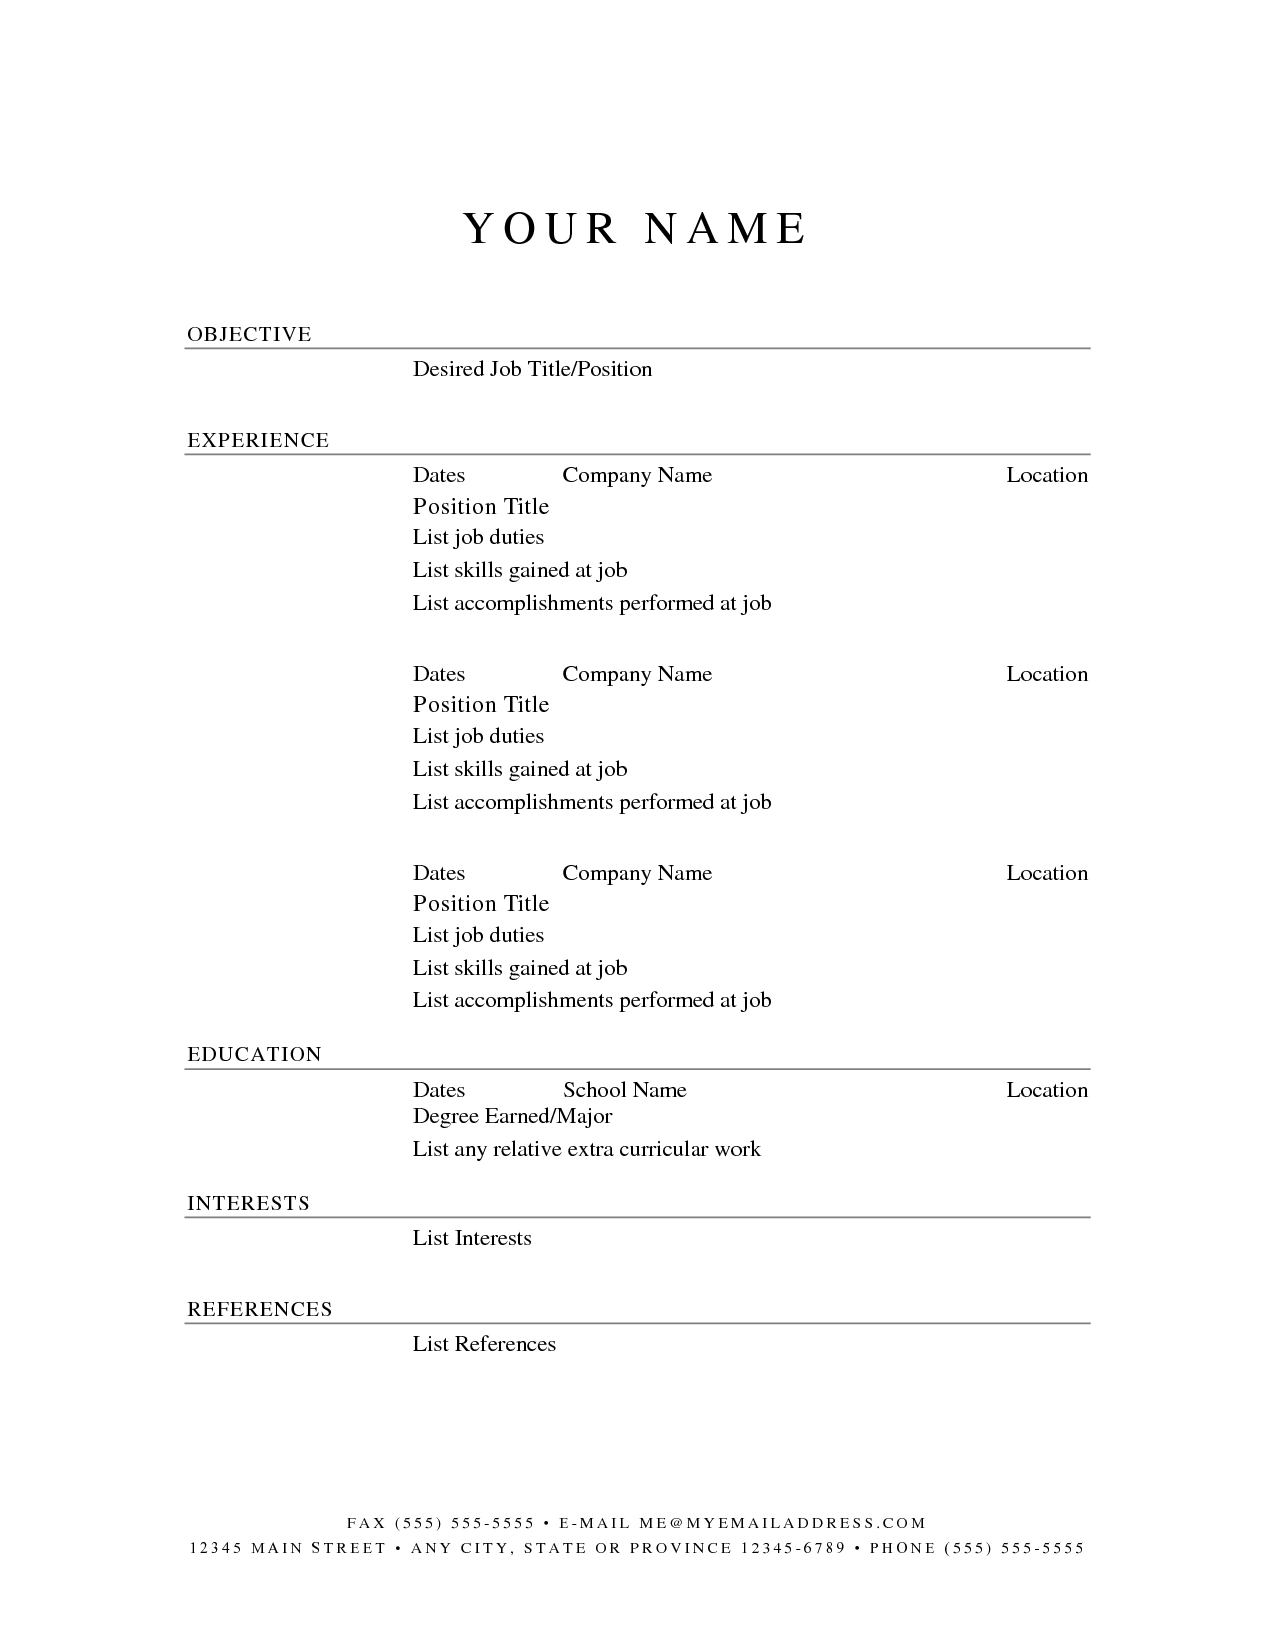 Resume Examples Printable | Job Search | Sample Resume Templates - Free Printable Fill In The Blank Resume Templates